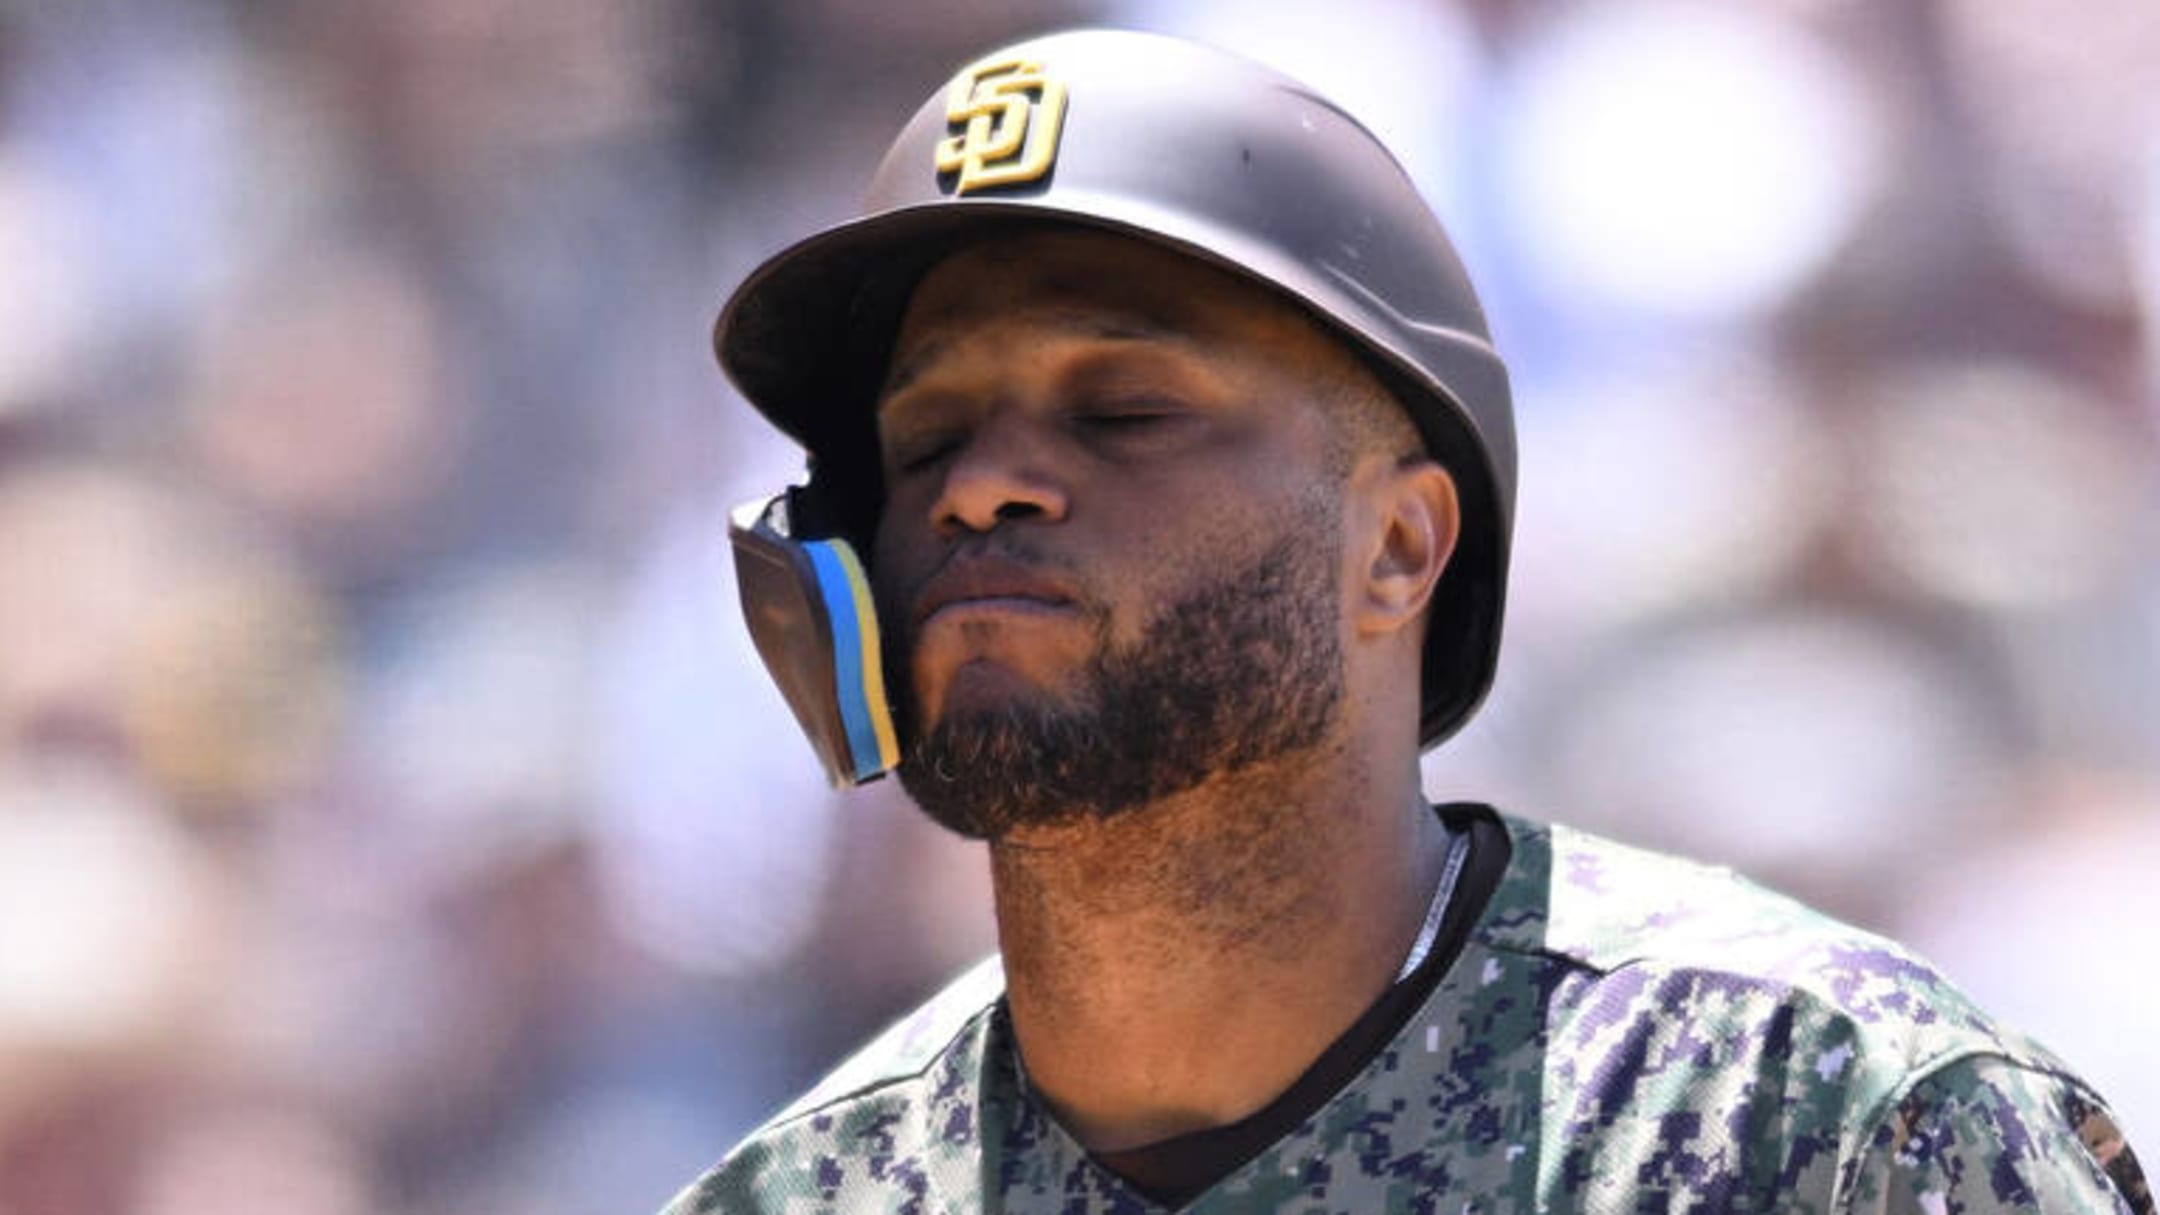 Robinson Cano Acquired by Braves From Padres, per Report - Sports